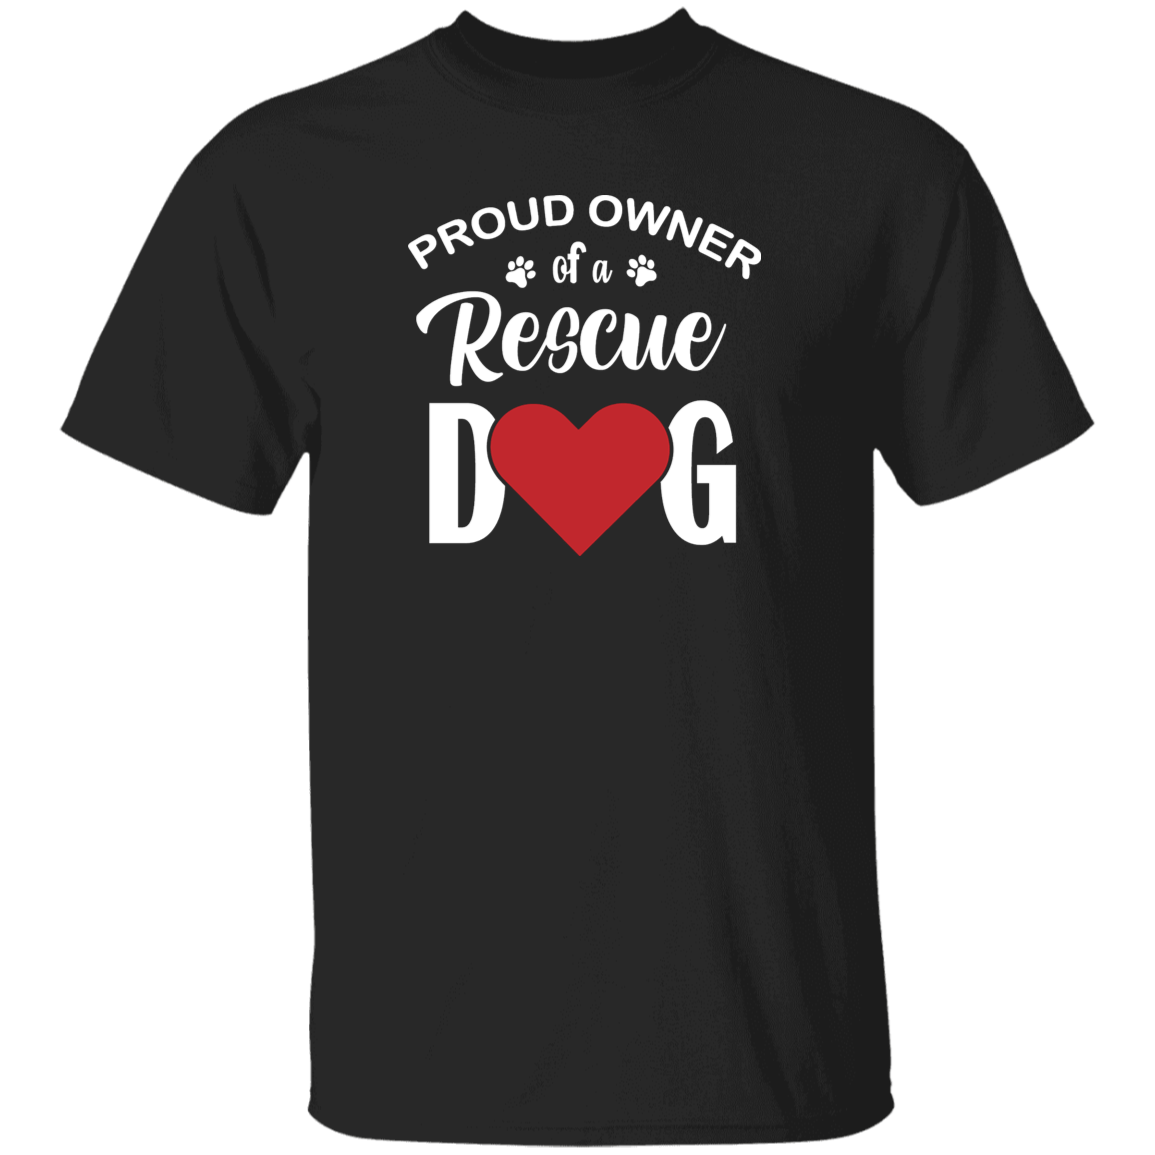 Proud Owner Of A Rescue Dog - T Shirt.